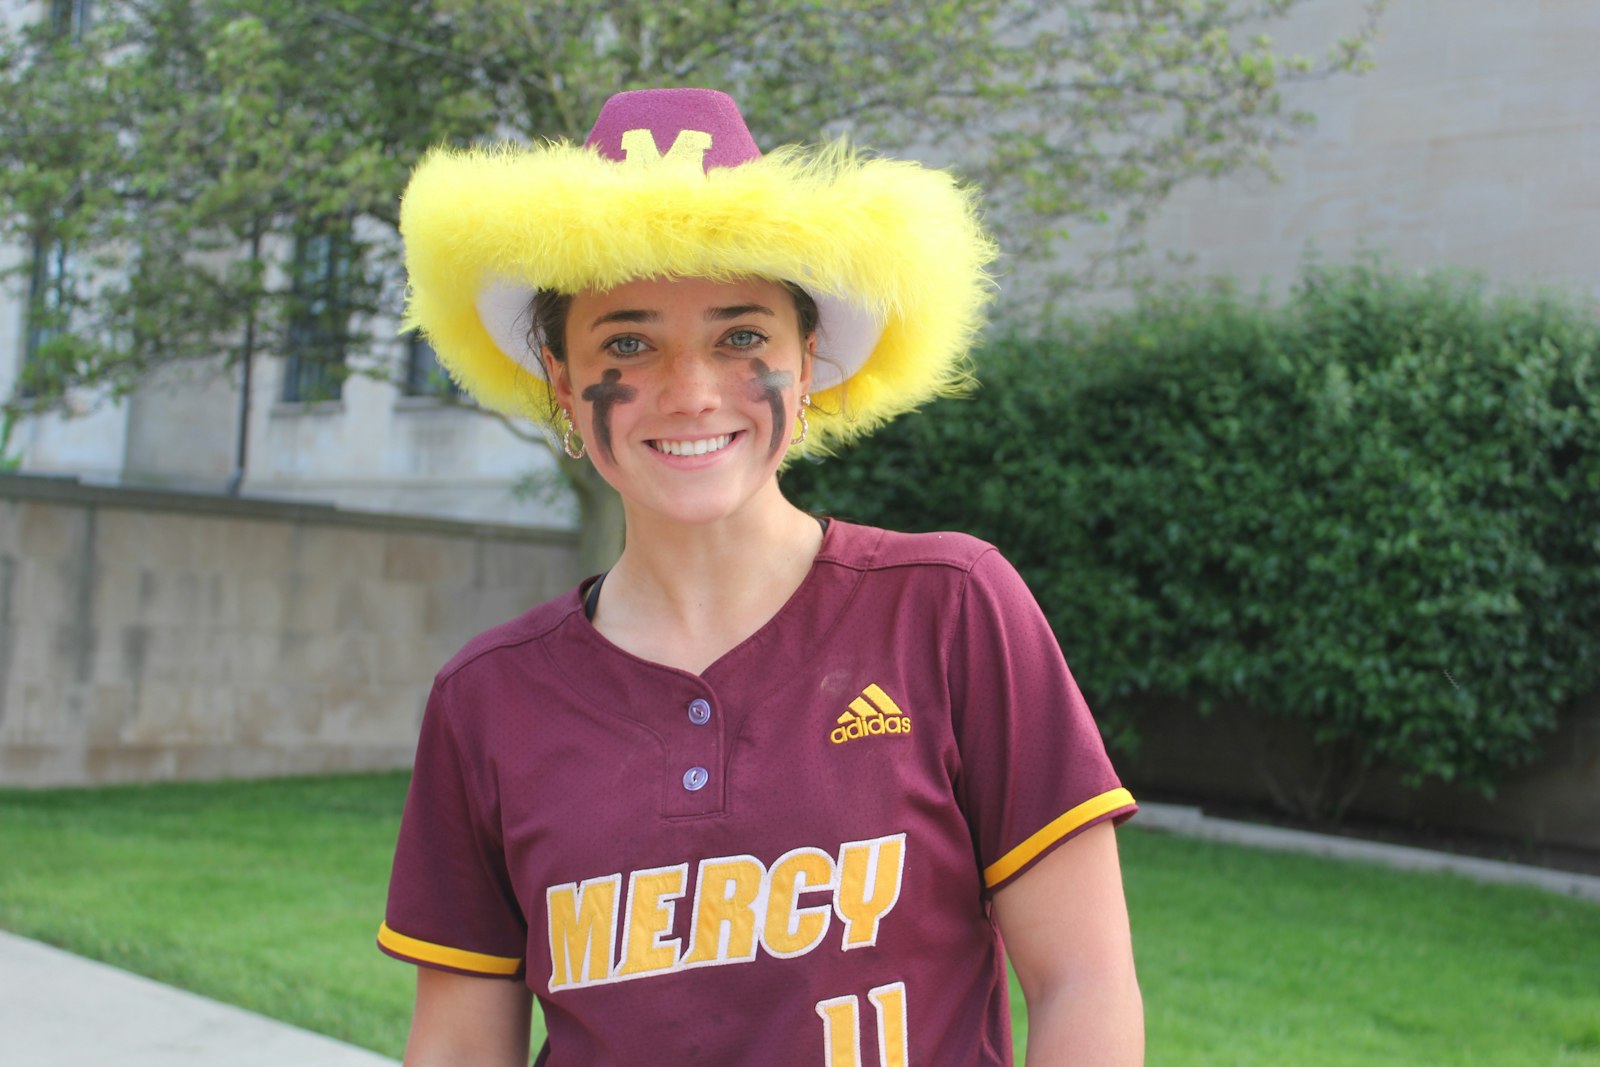 Senior shortstop Gage Lambert shows off her prize for getting the game-winning hit: a fringed maroon-and-gold cowboy hat, passed around among the Mercy team to the player who makes the clutch play.